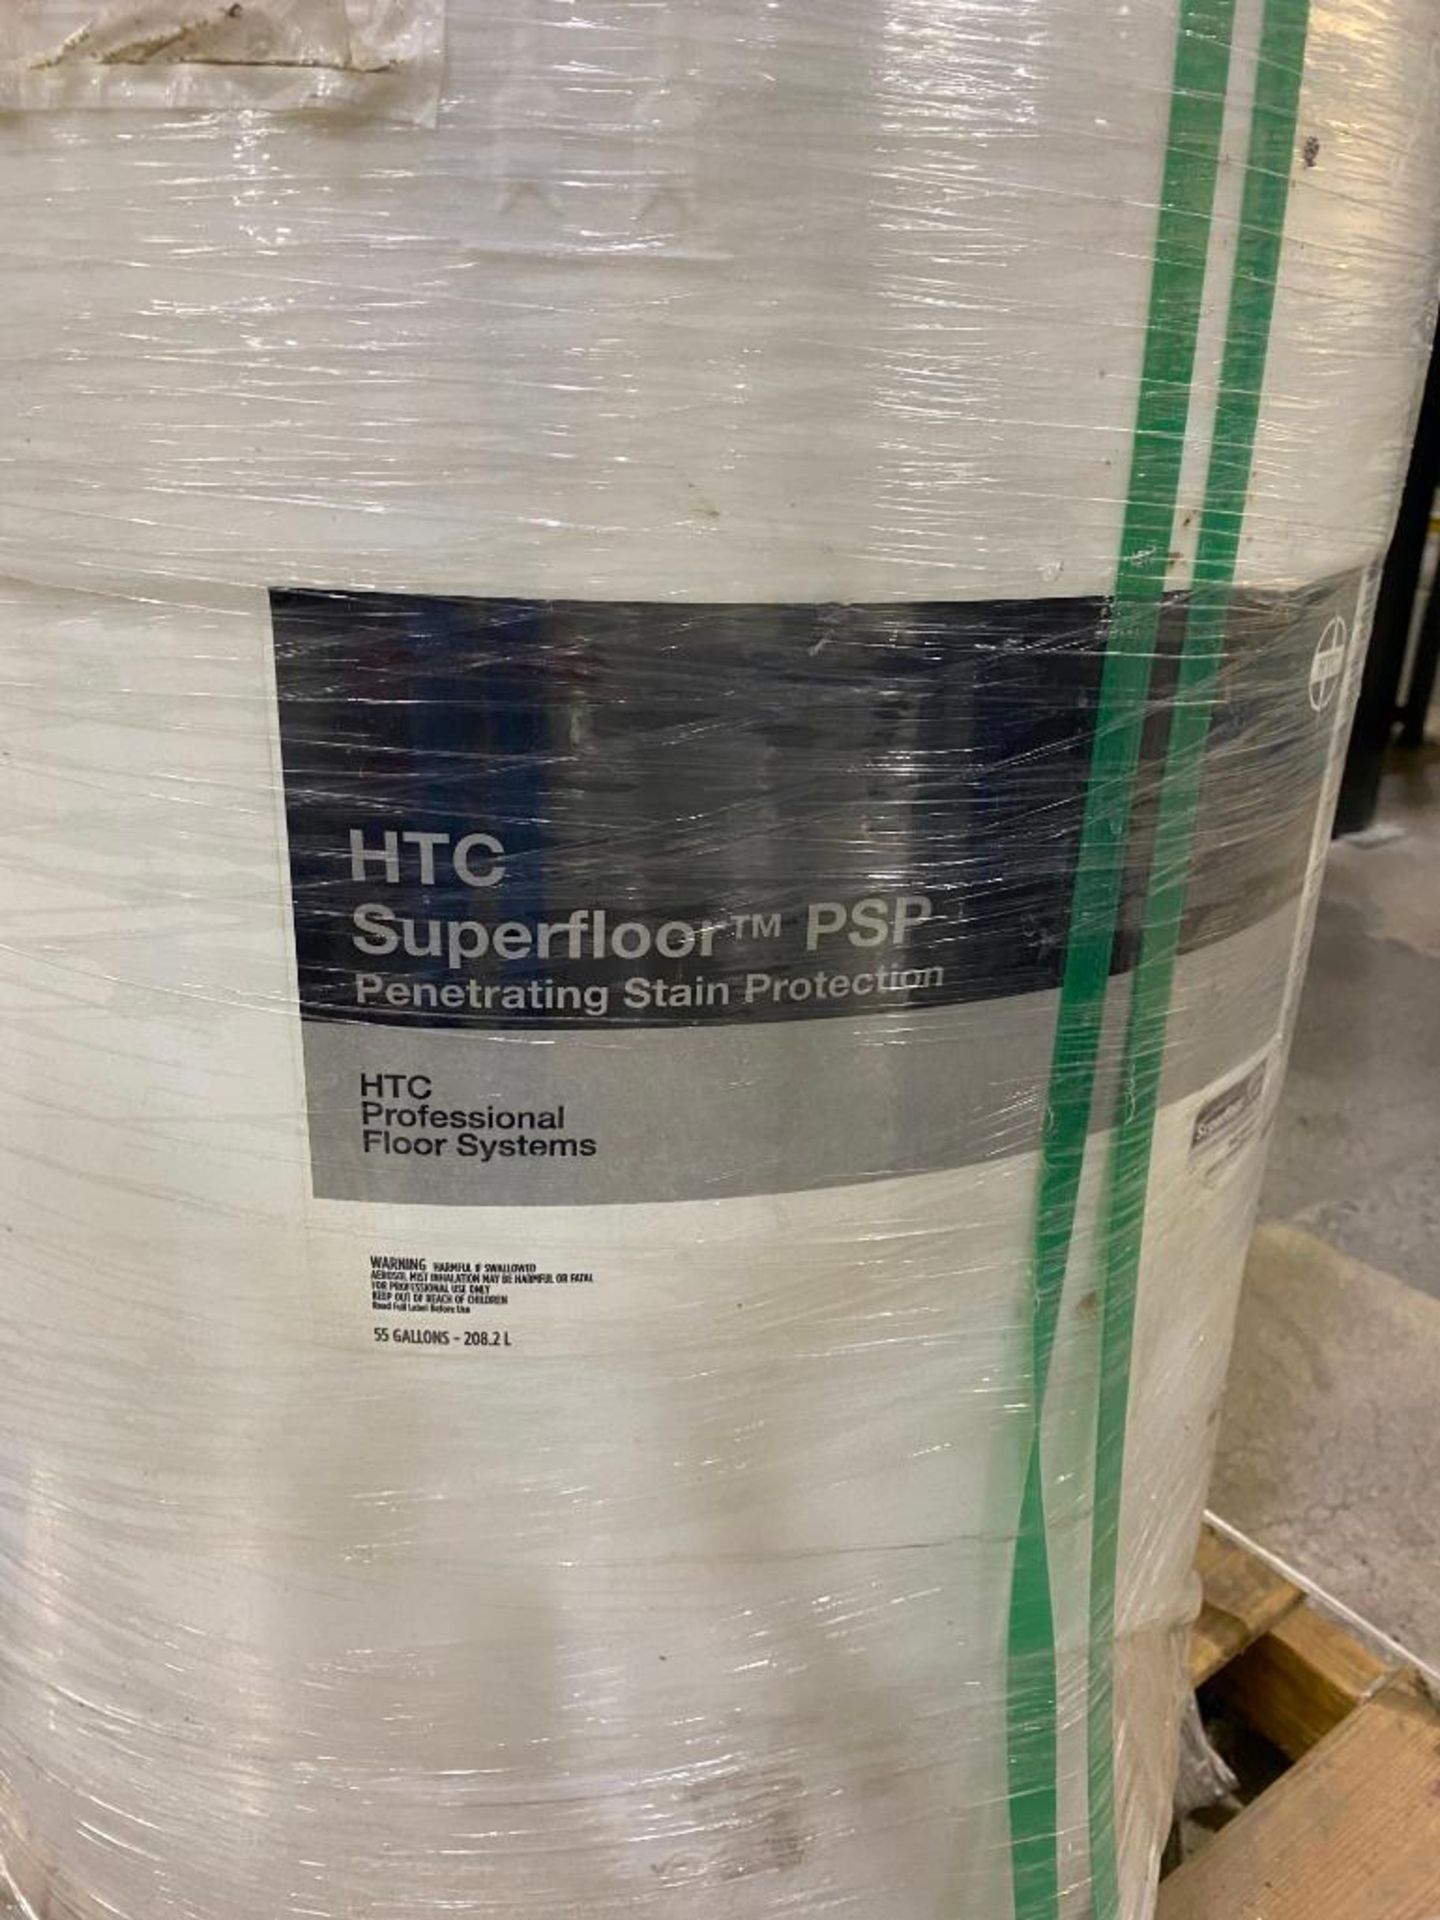 HTC SUPER FLOOR PSP, PENETRATING STAIN PROTECTION SOLUTION, 55-GAL. DRUM - Image 2 of 2